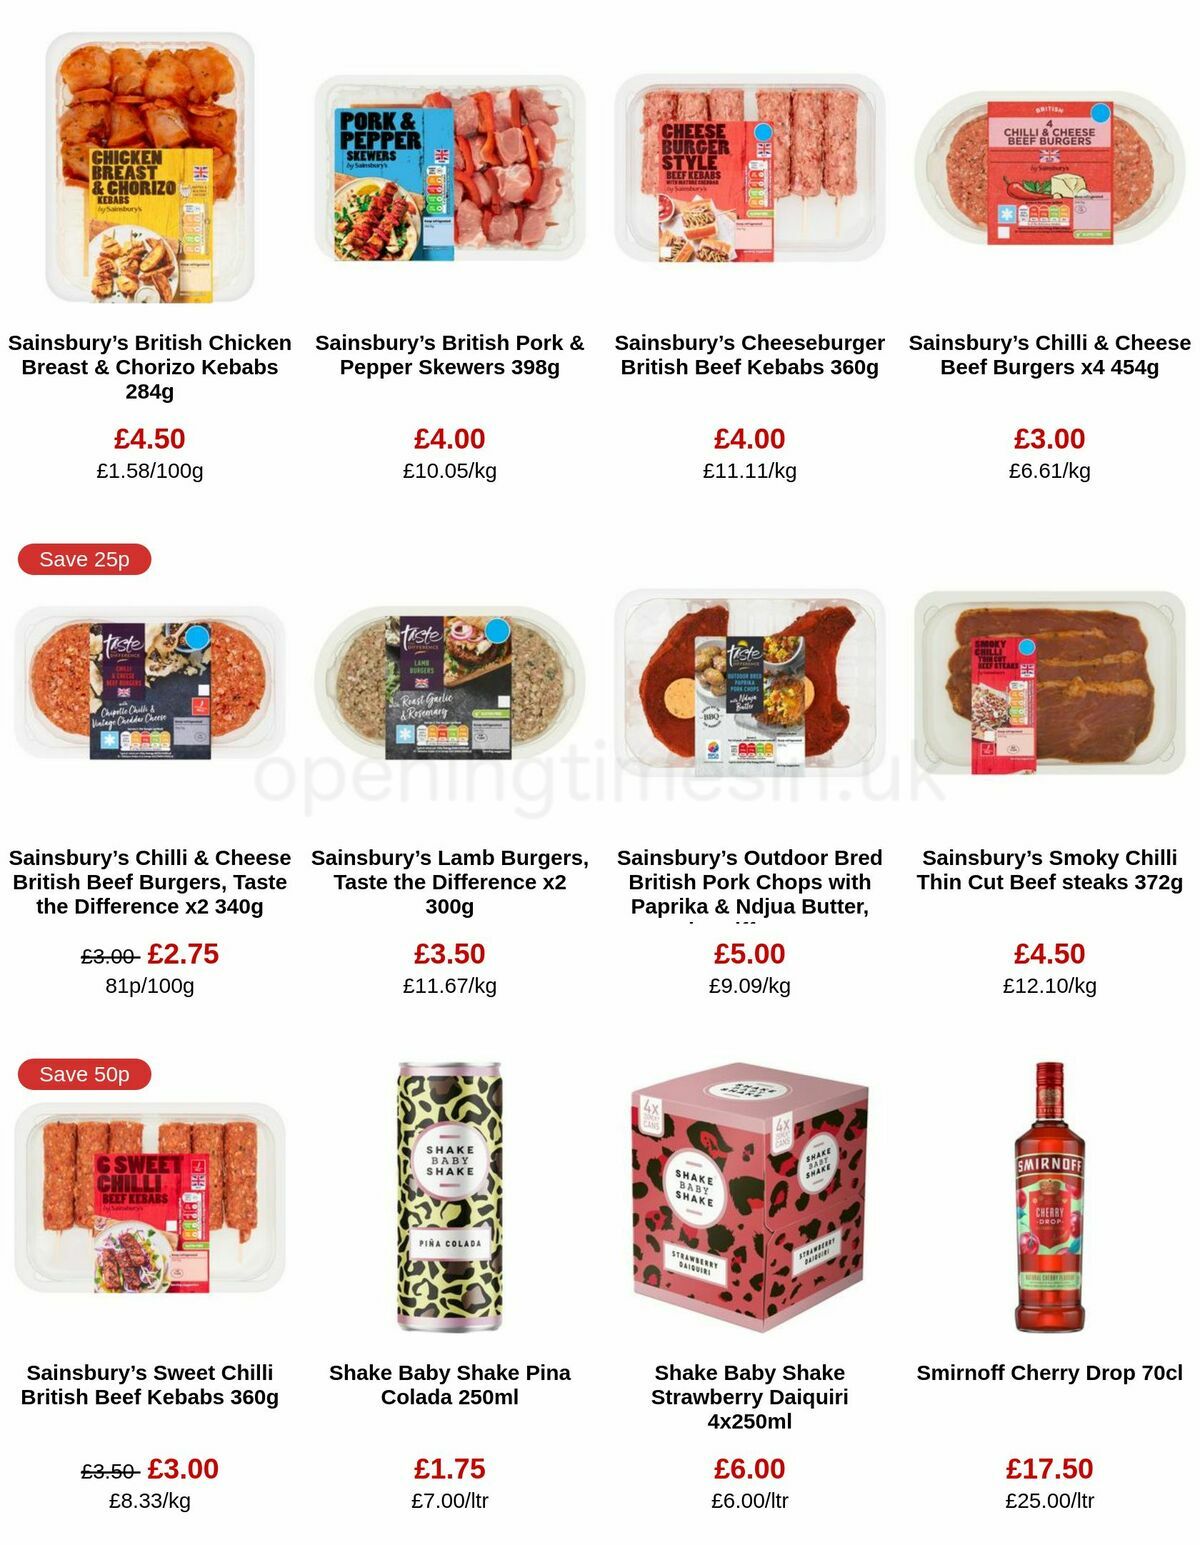 Sainsbury's Offers from 9 June